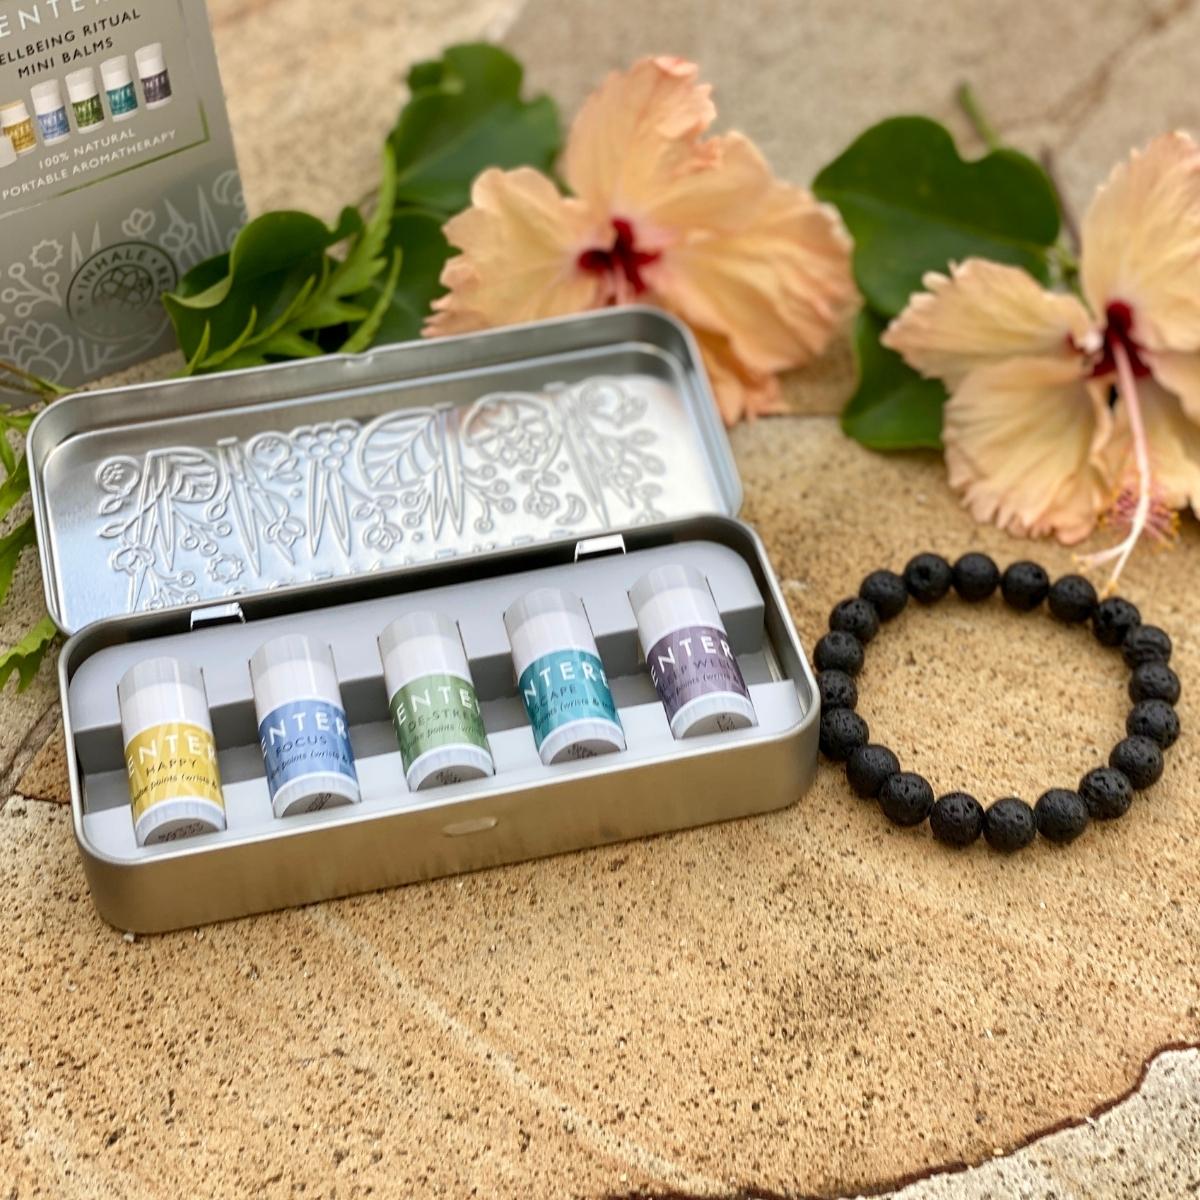 Lava Stone Bracelet for Calming Emotions.  Lava stone is excellent for calming emotions thanks to its grounding qualities. Holds essential oils for 8 hours. Mindful Aromatherapy Mini Balms with Lava Stone Bracelet for the perfect wellbeing ritual.